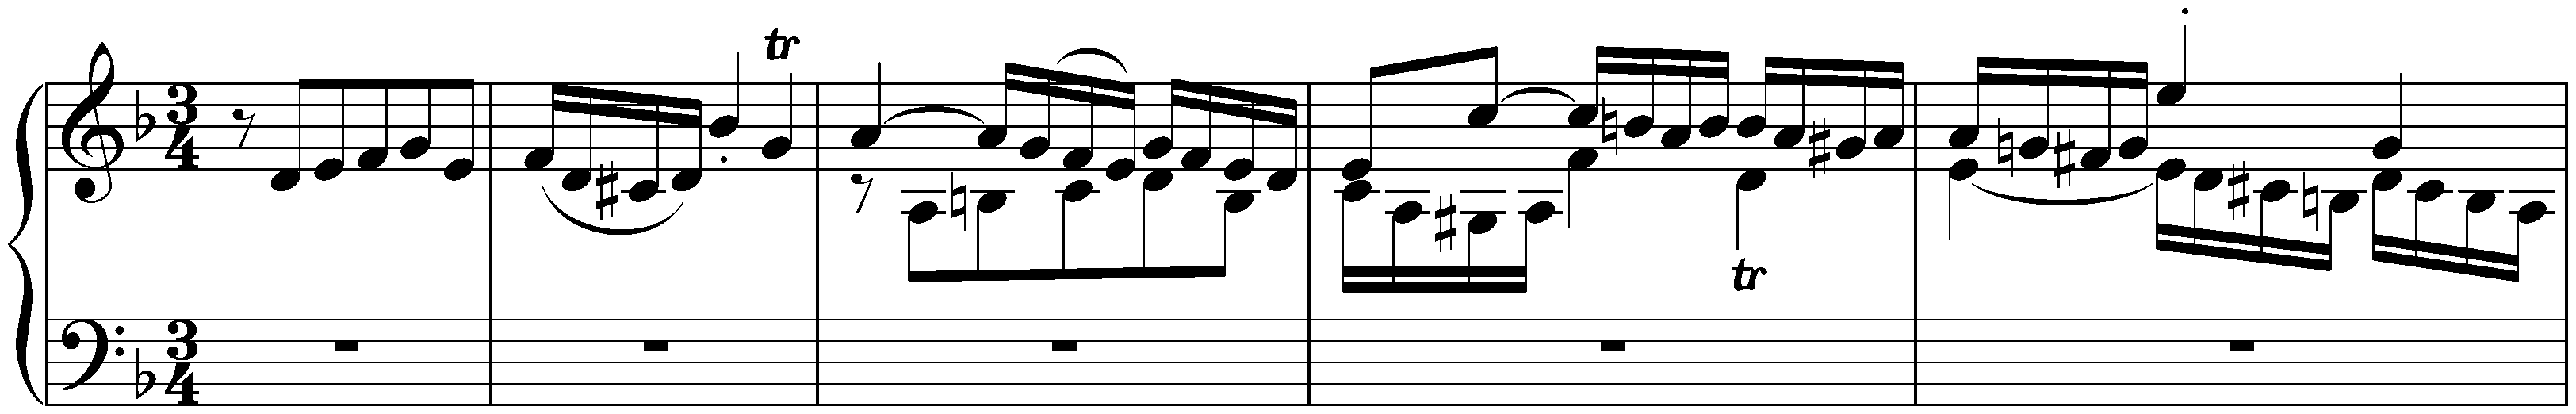 The Well-Tempered Clavier, Book 1, BWV 846–869; 6. D minor, BWV 851, Fugue